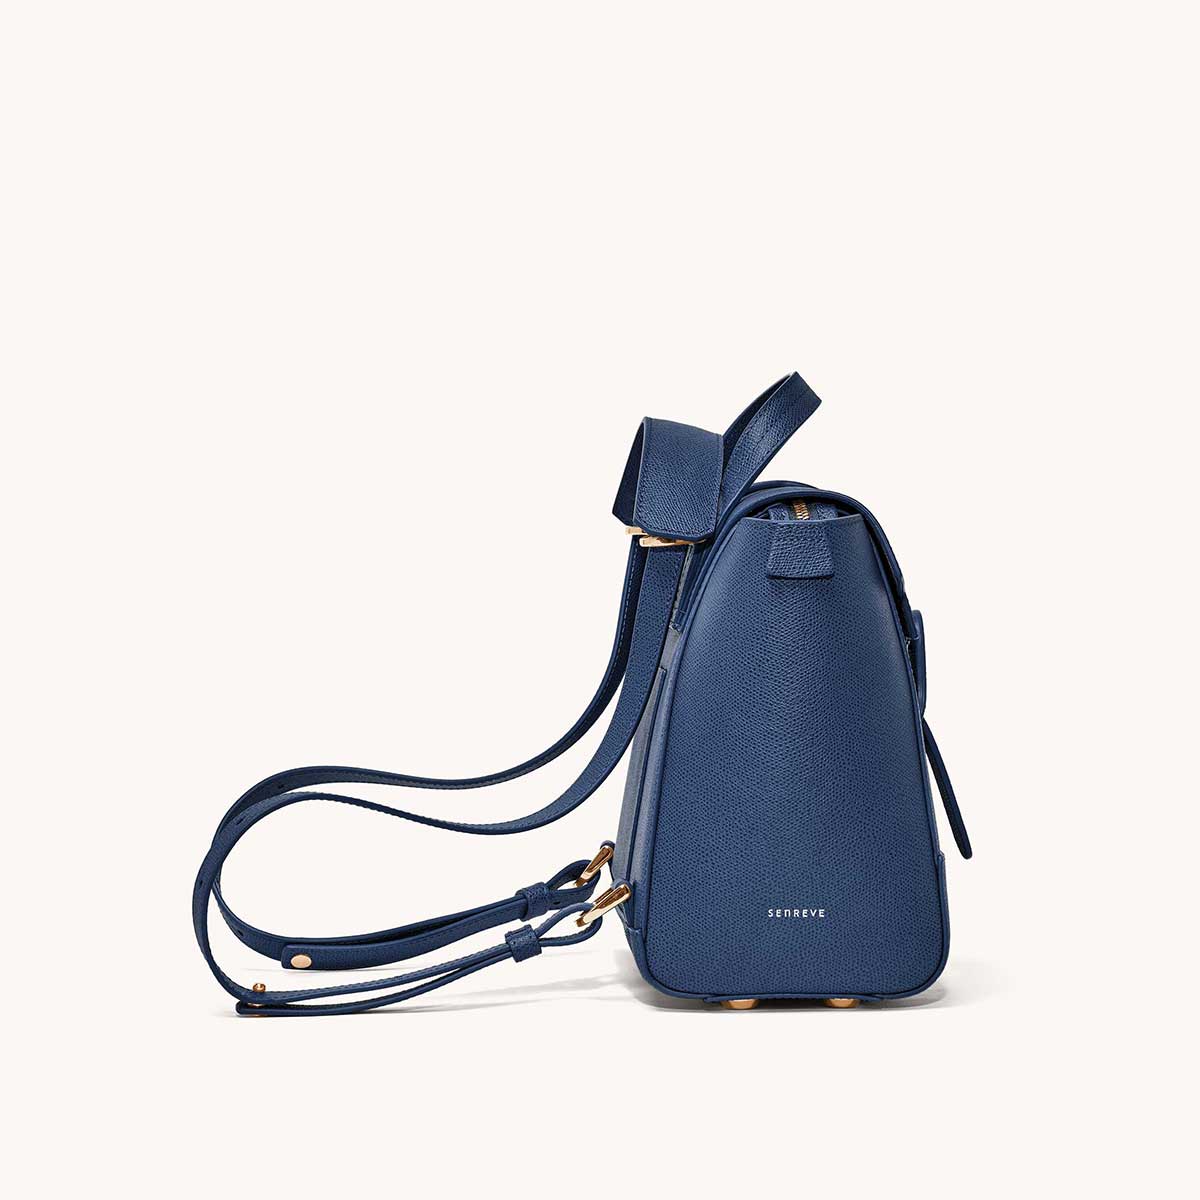 Midi Maestra Bag Pebbled Marine with Gold Hardware Side View